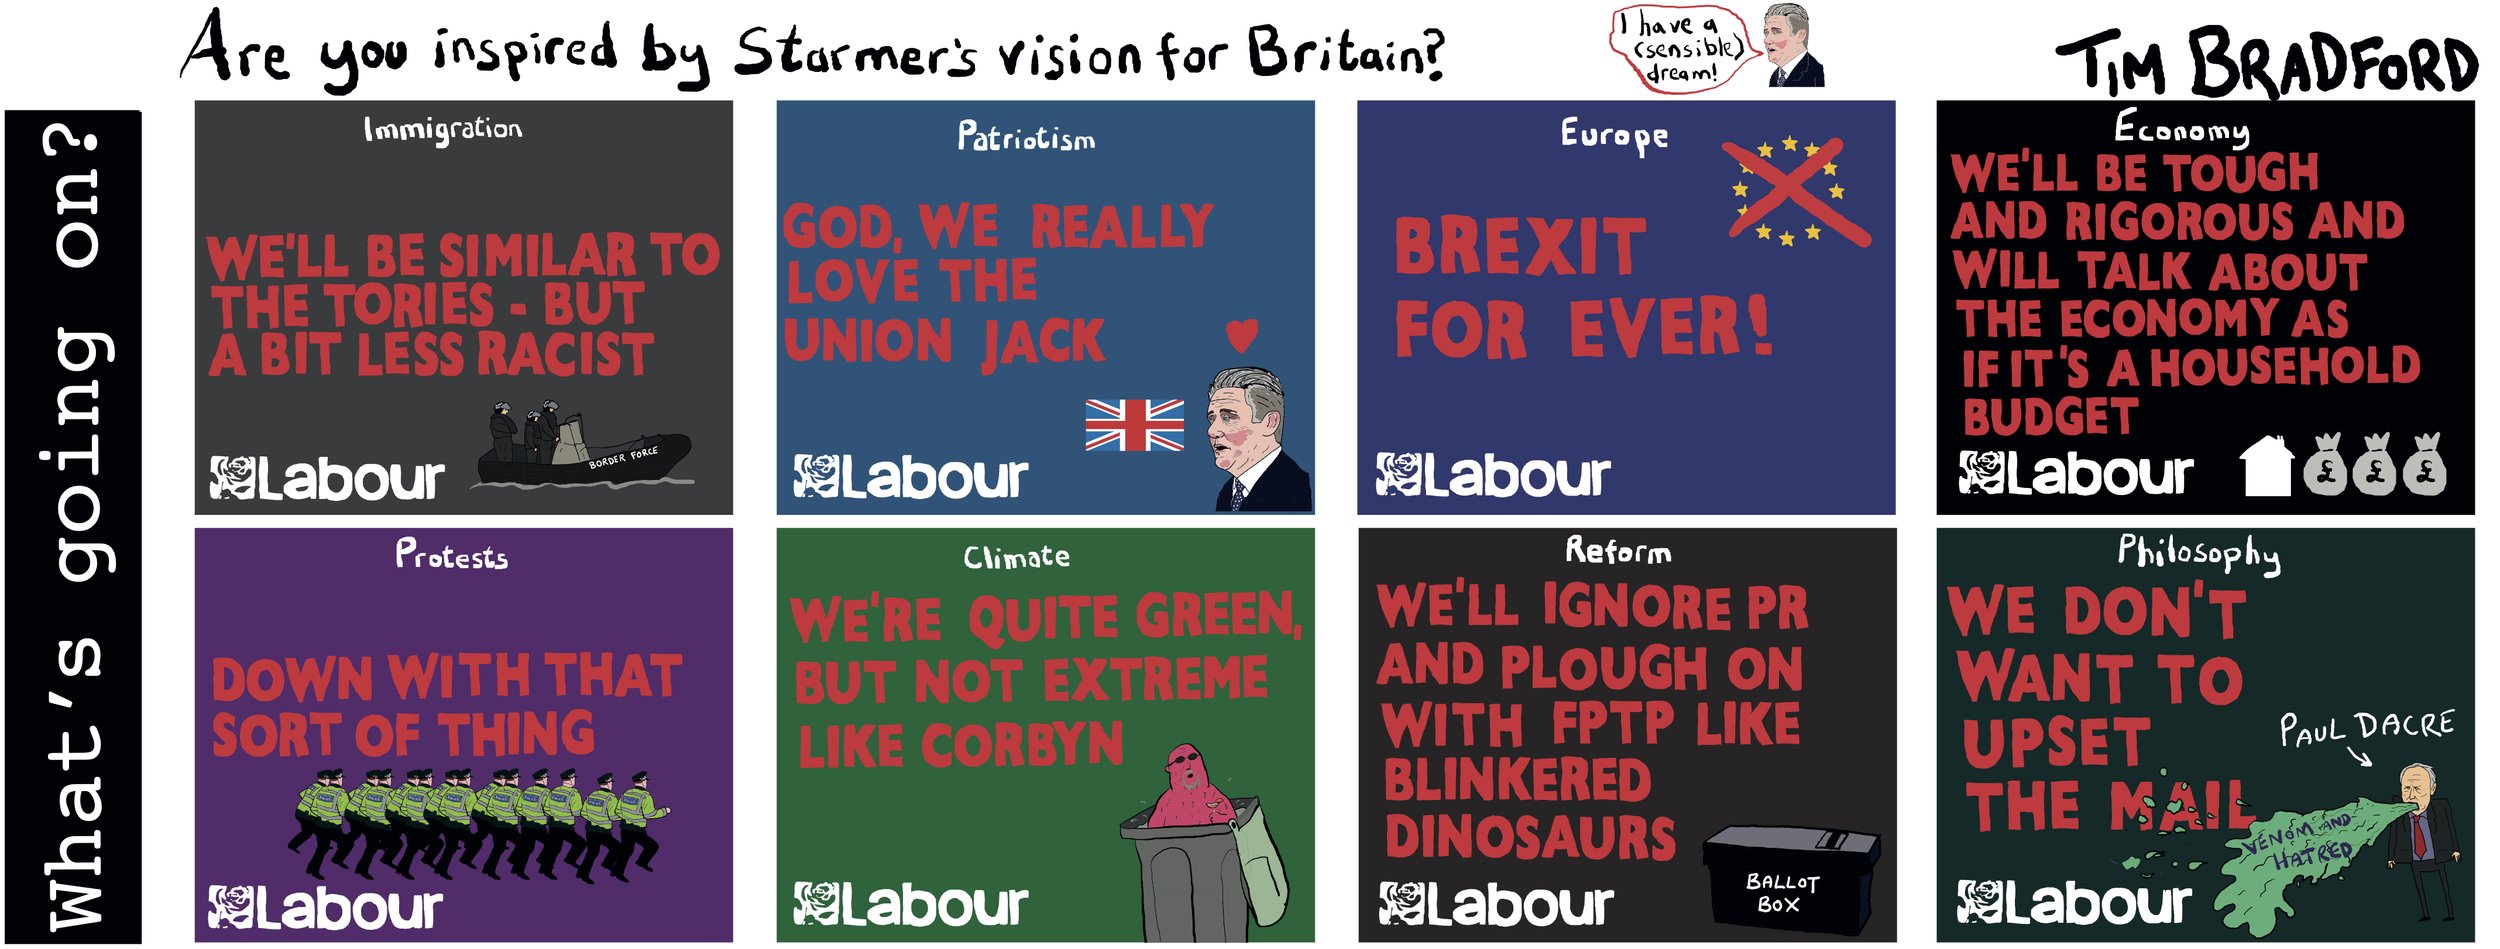 Are you inspired by Starmer's vision for Britain? - 21/11/2022